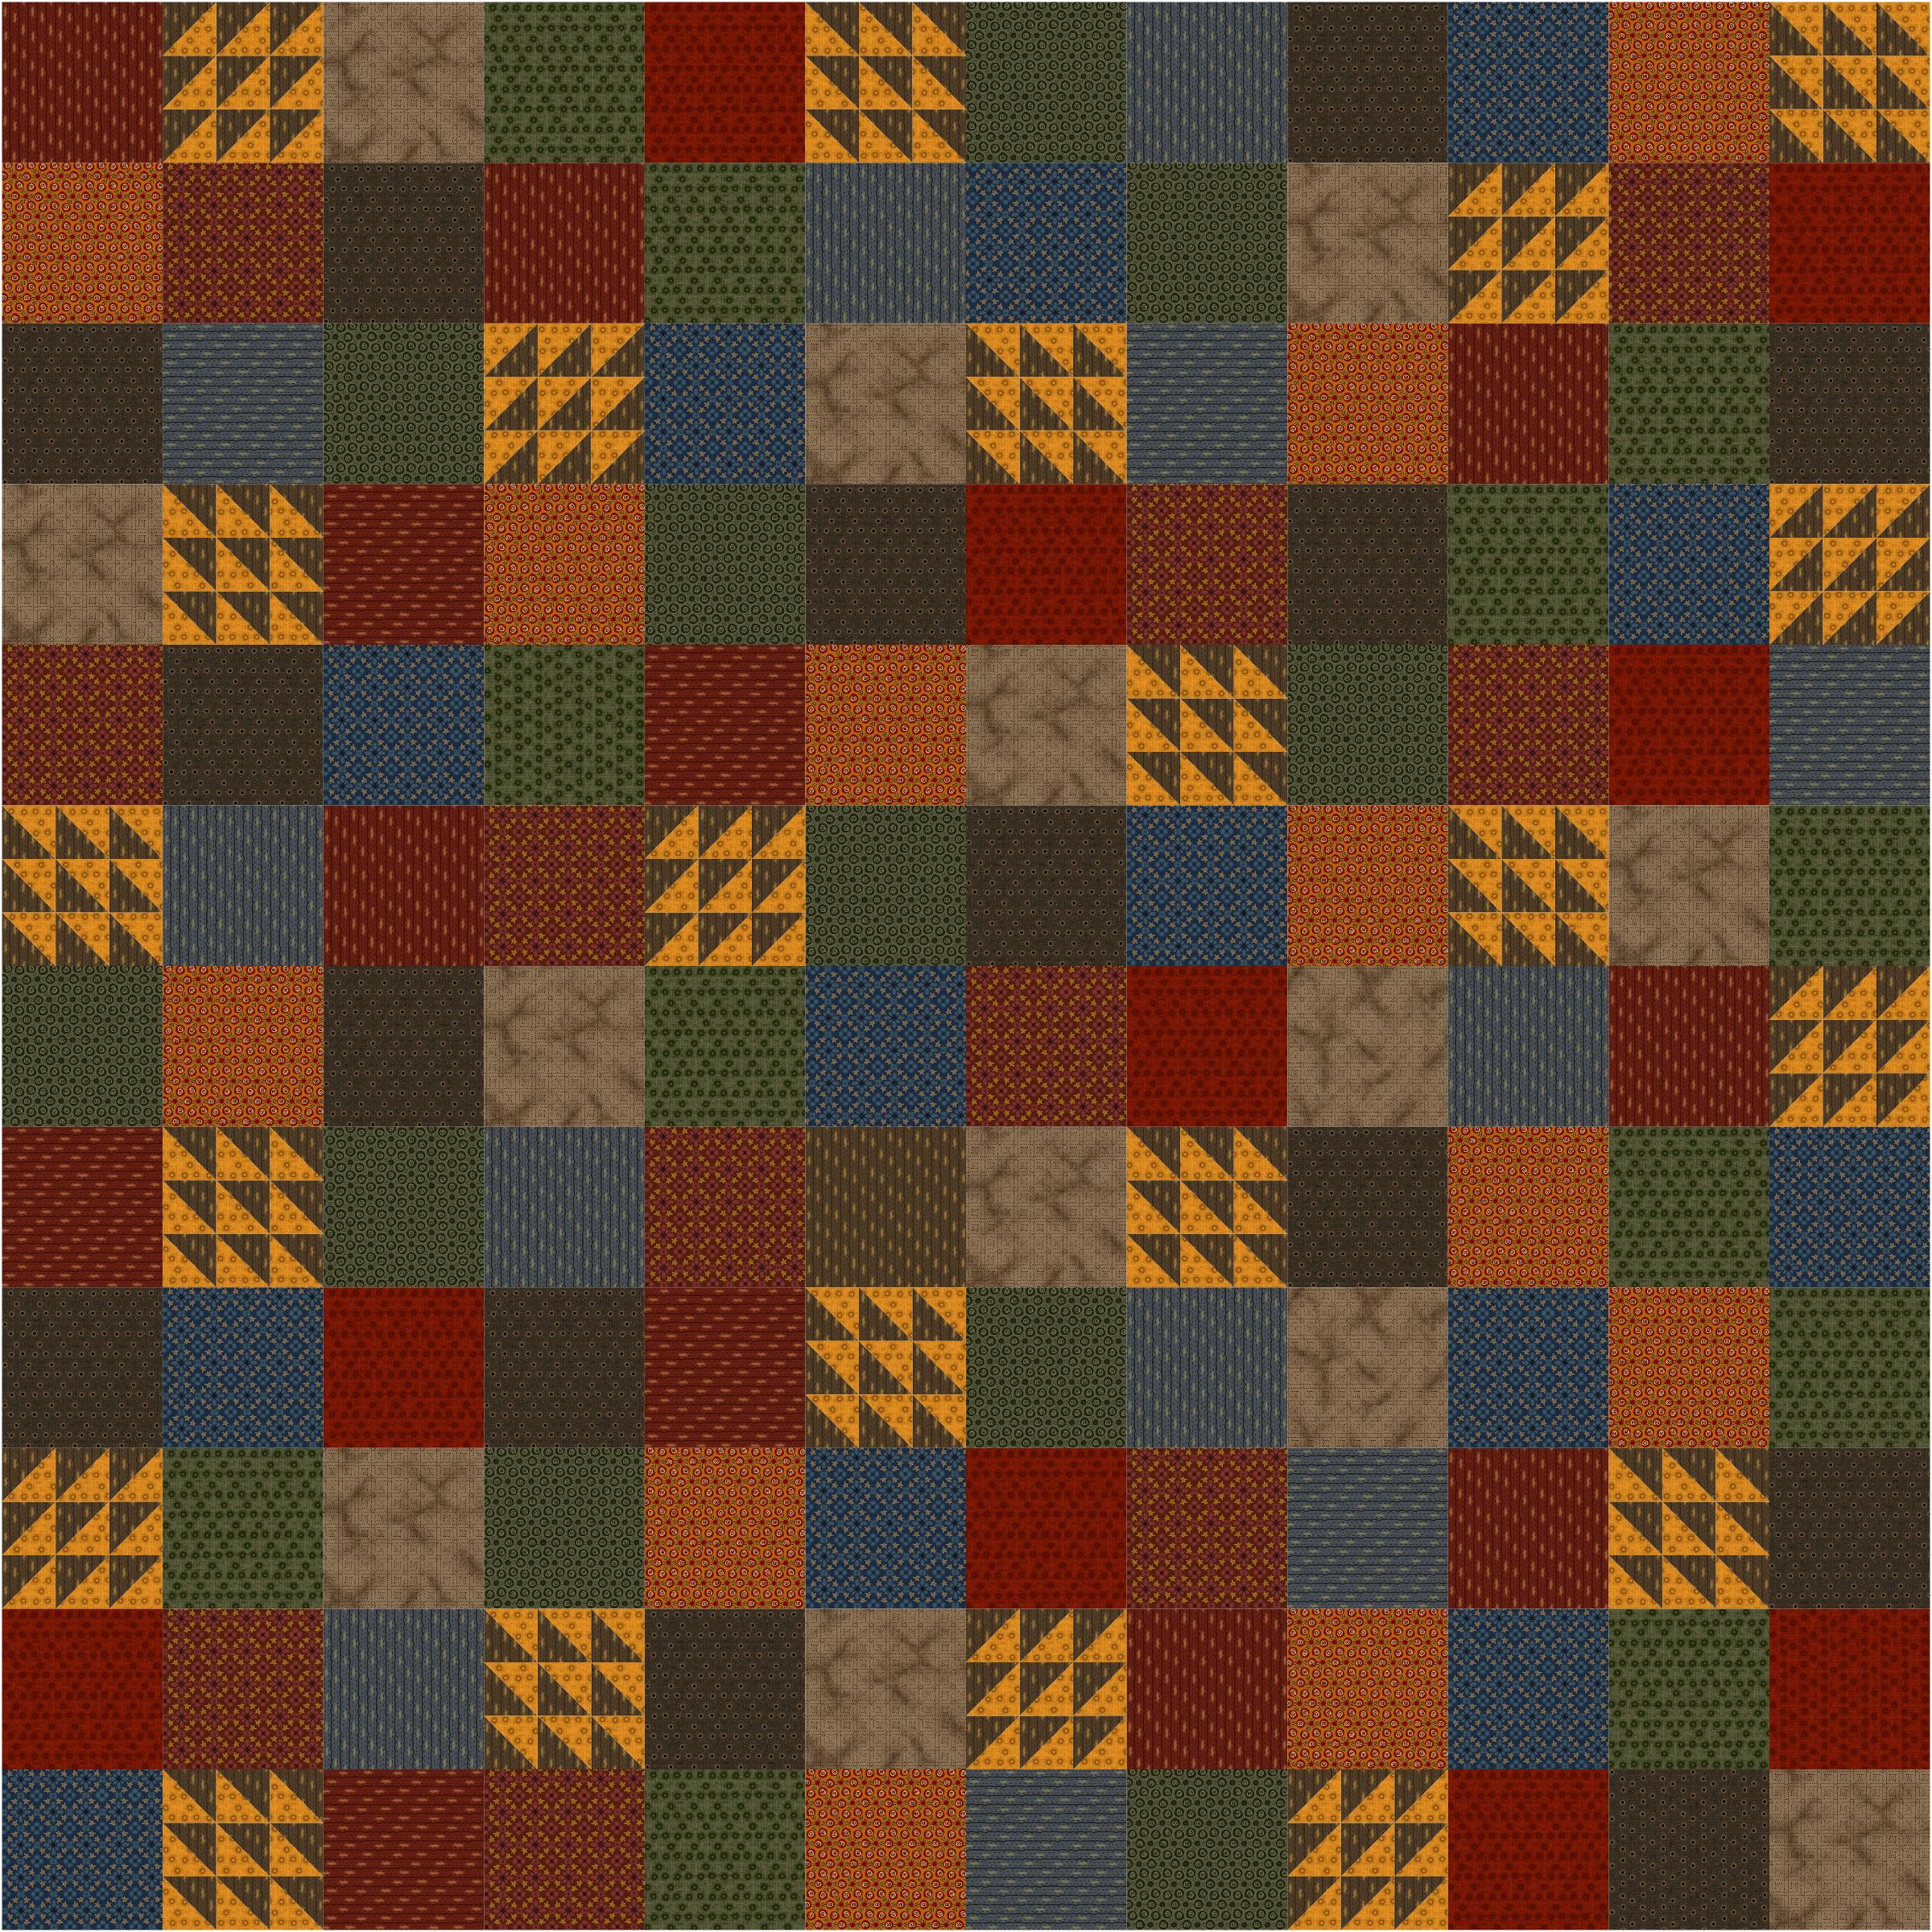 Buoyancy quilt using Ginger and Spice Fabrics